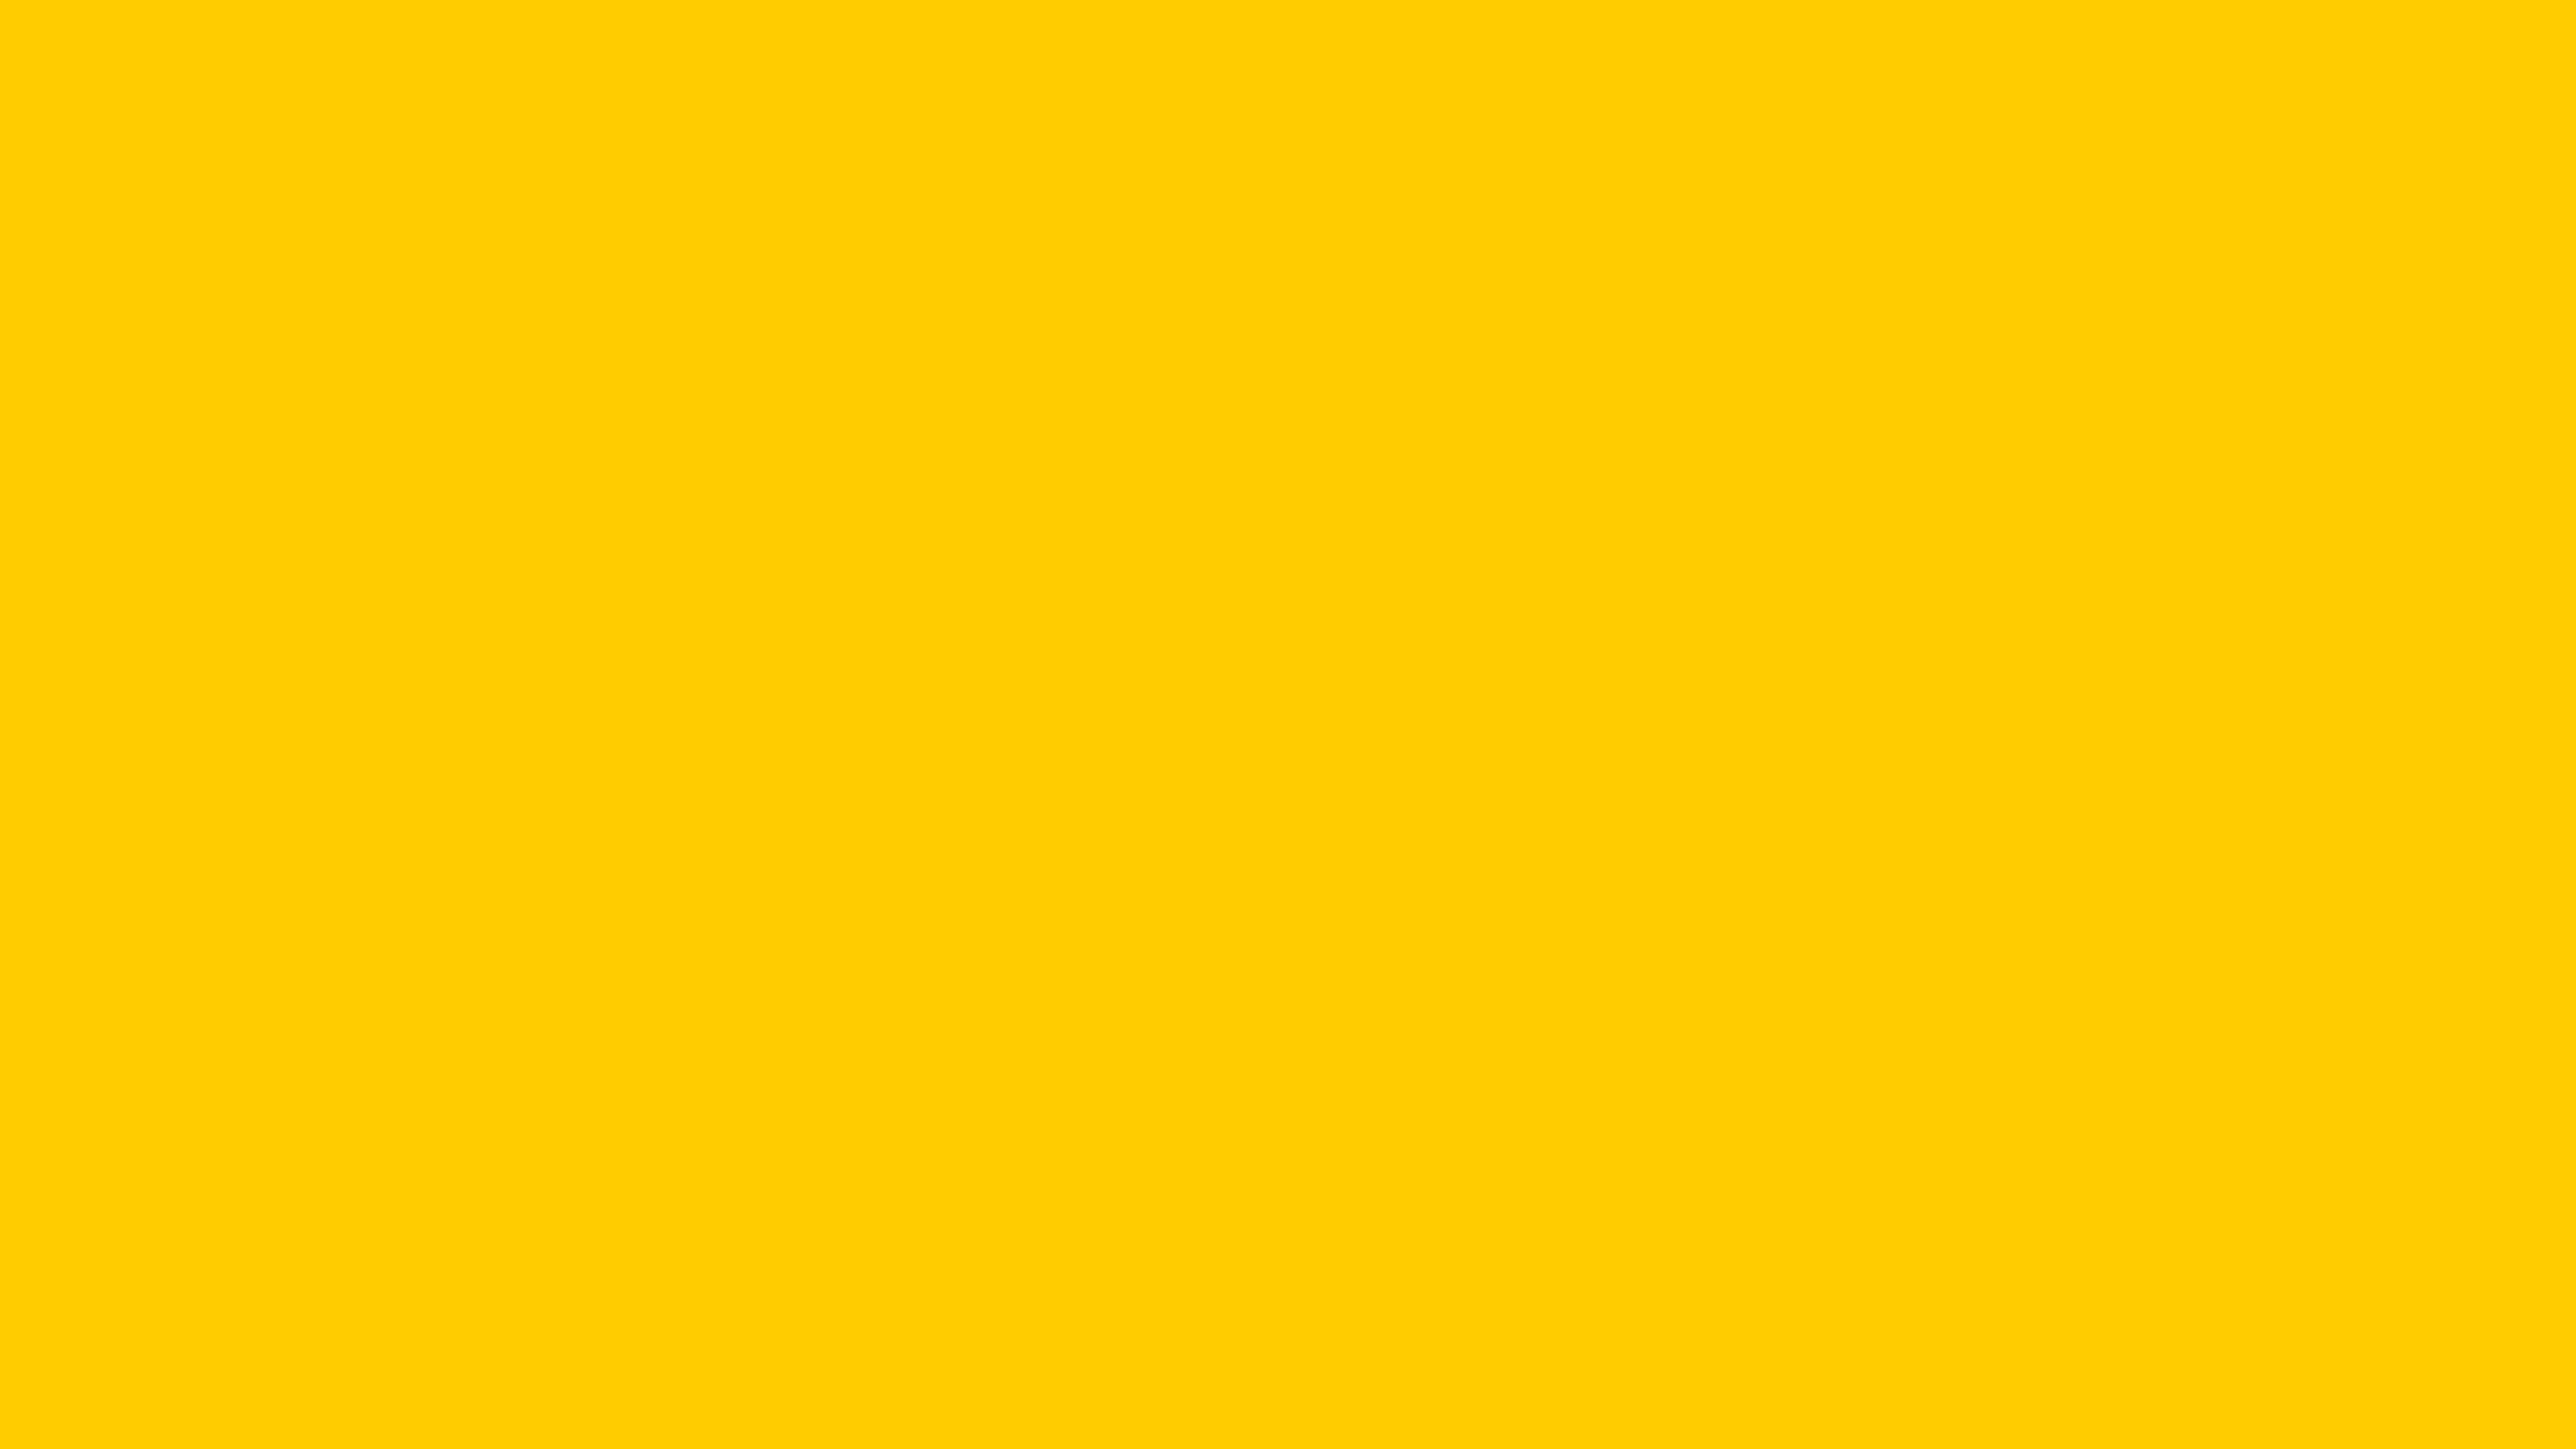 7680x4320 Tangerine Yellow Solid Color Background